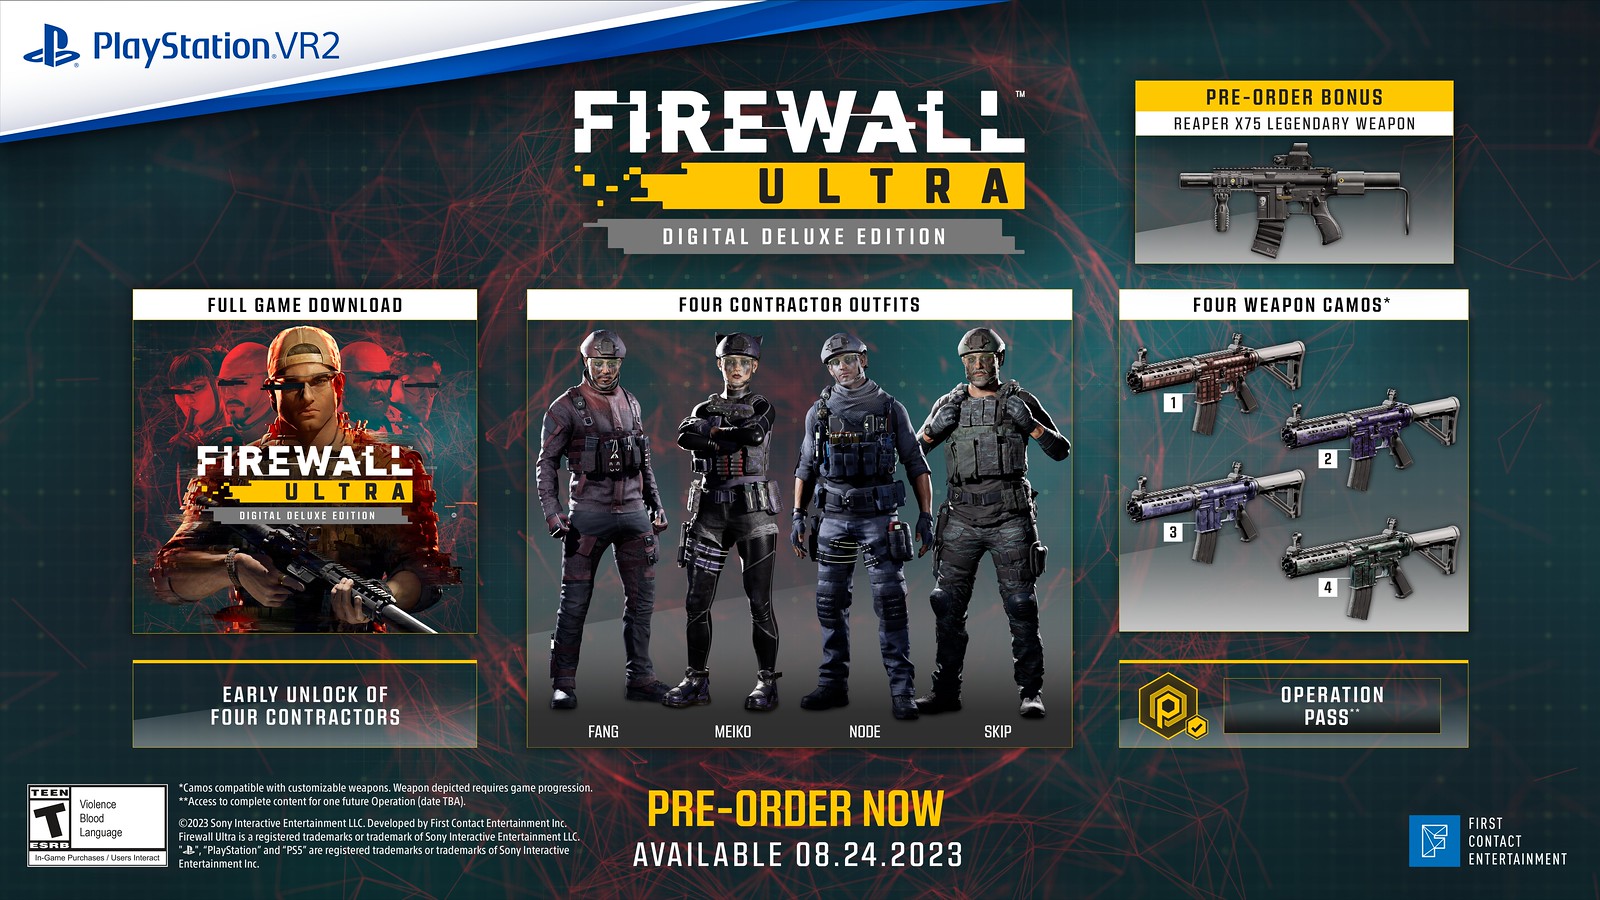 The Firewall Ultra Digital Deluxe Edition includes the full game download of Firewall Ultra, Early unlock of four contractors (Fang, Meiko, Node, Skip), Four contractor outfits (for unlocked contractors), Four weapon camos, Operation Pass (access to complete content for one future Operation (date TBA)). Preorder and receive the Reaper X75 legendary weapon in-game.